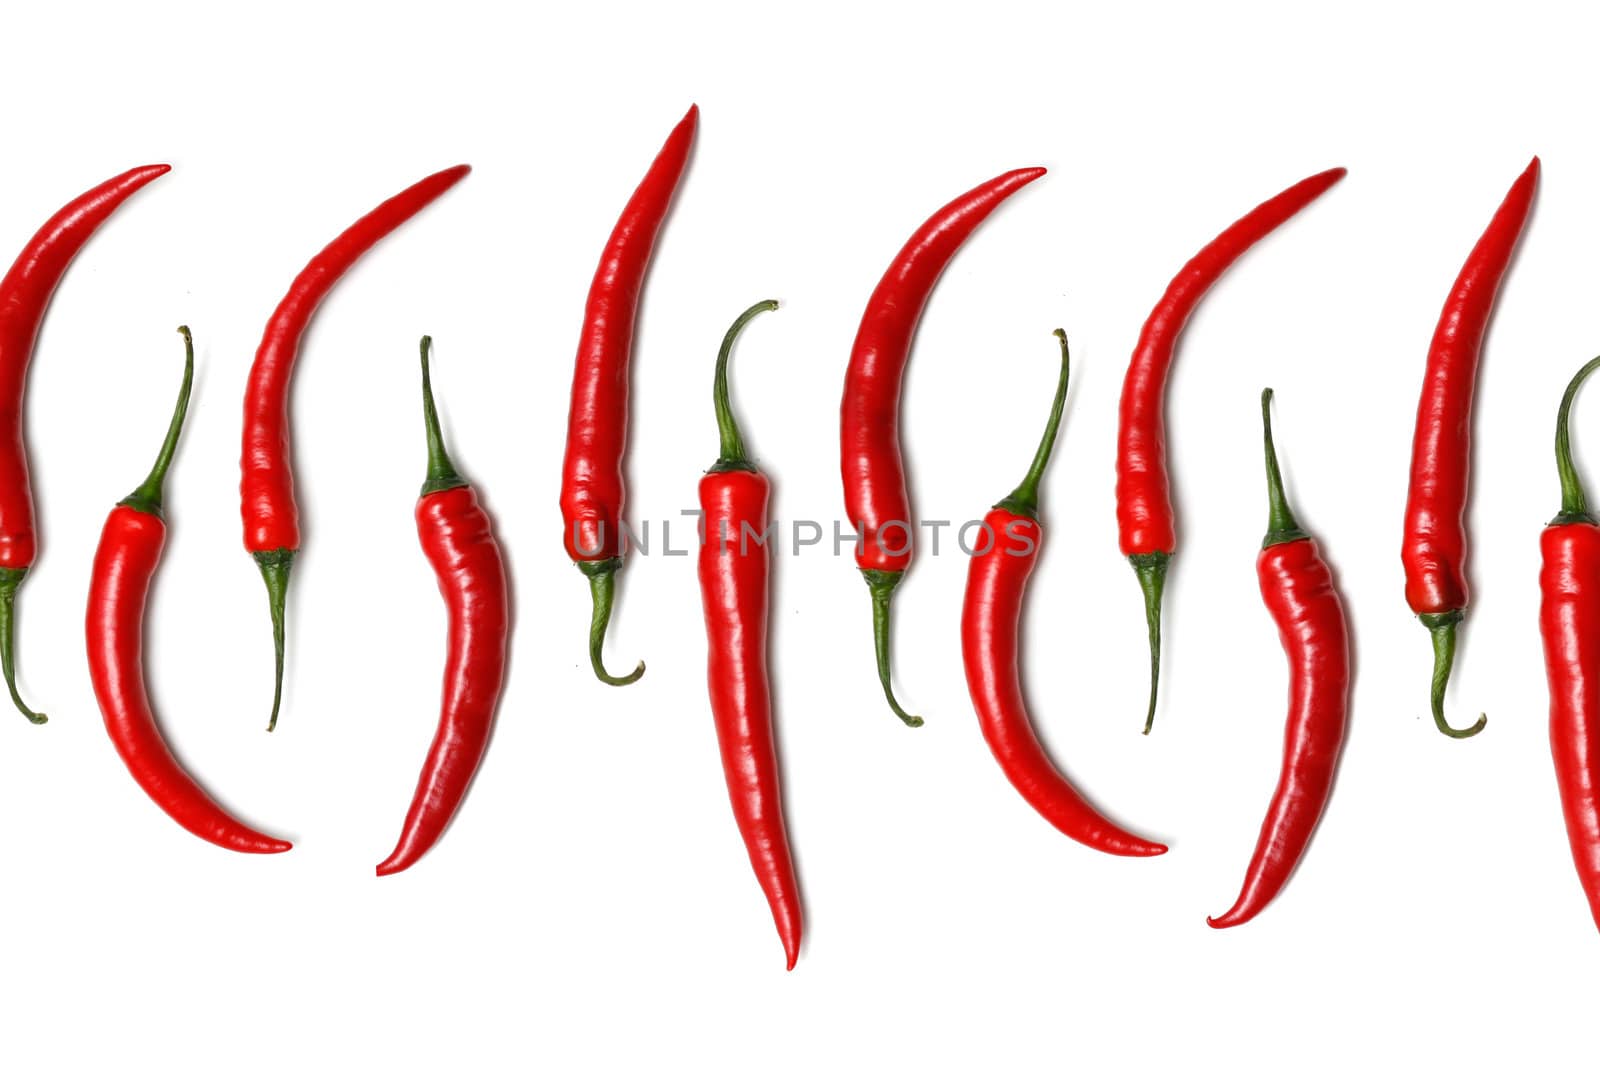 Chili peppers by leeser